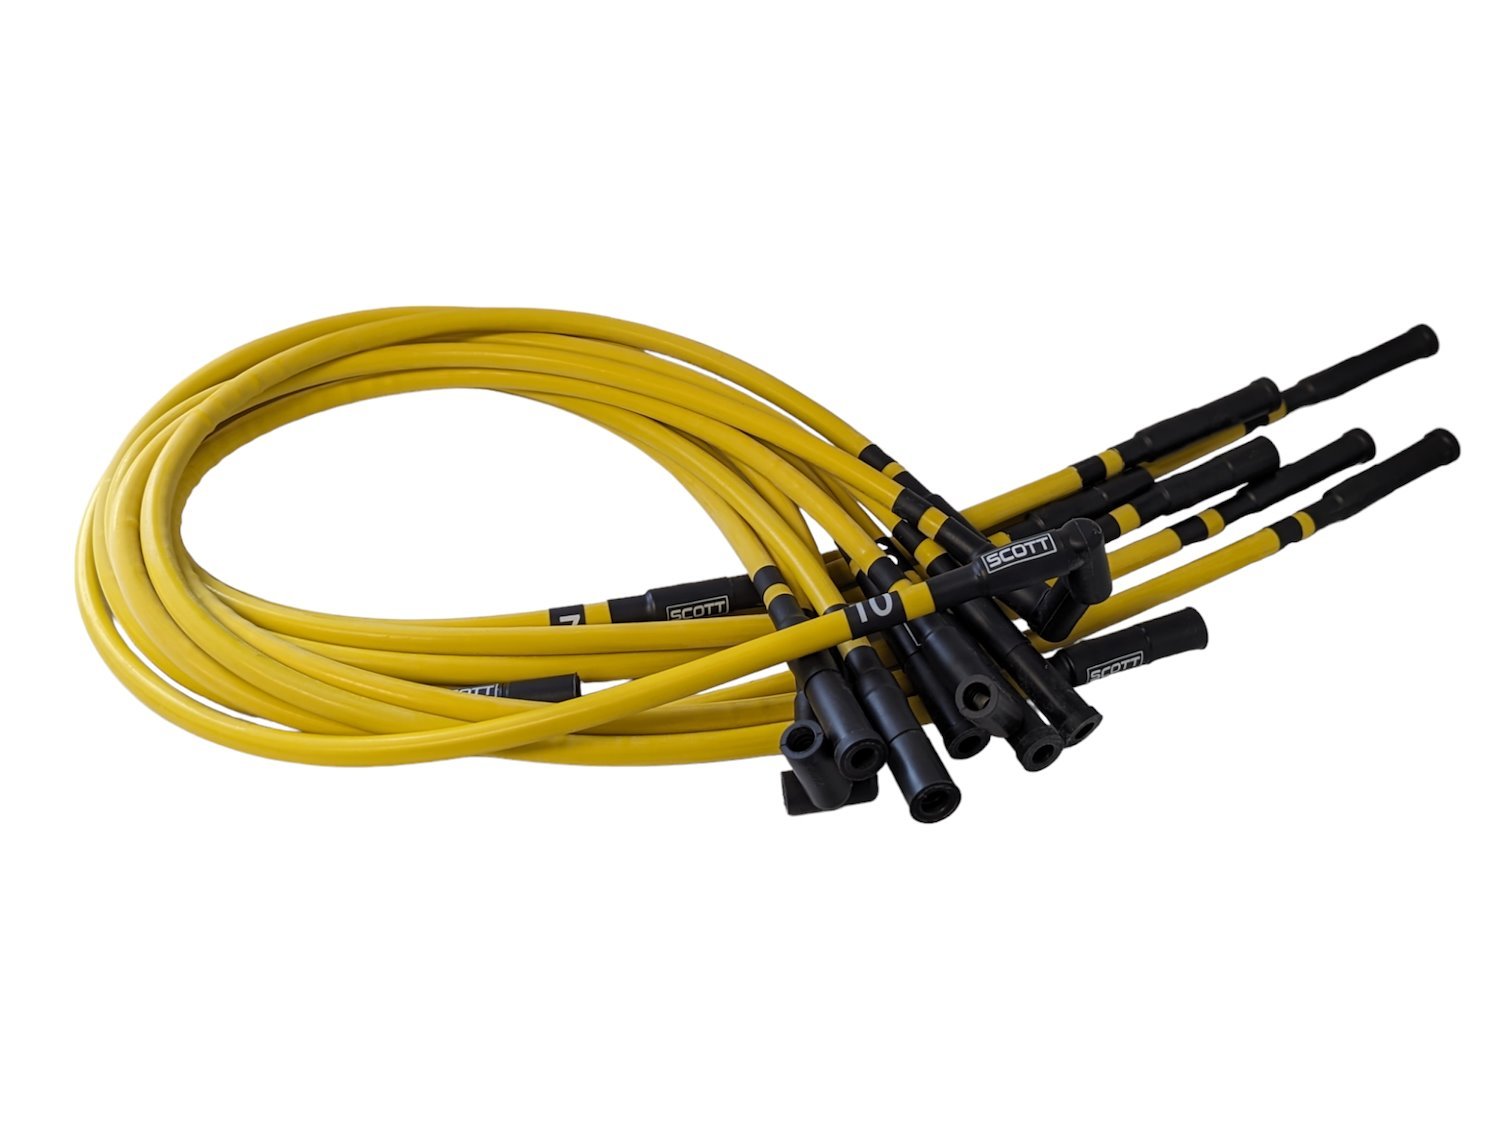 SPW-CH-690-III-7 High-Performance Silicone-Sleeved Spark Plug Wire Set for Dodge Viper (Gen-3) [Yellow]